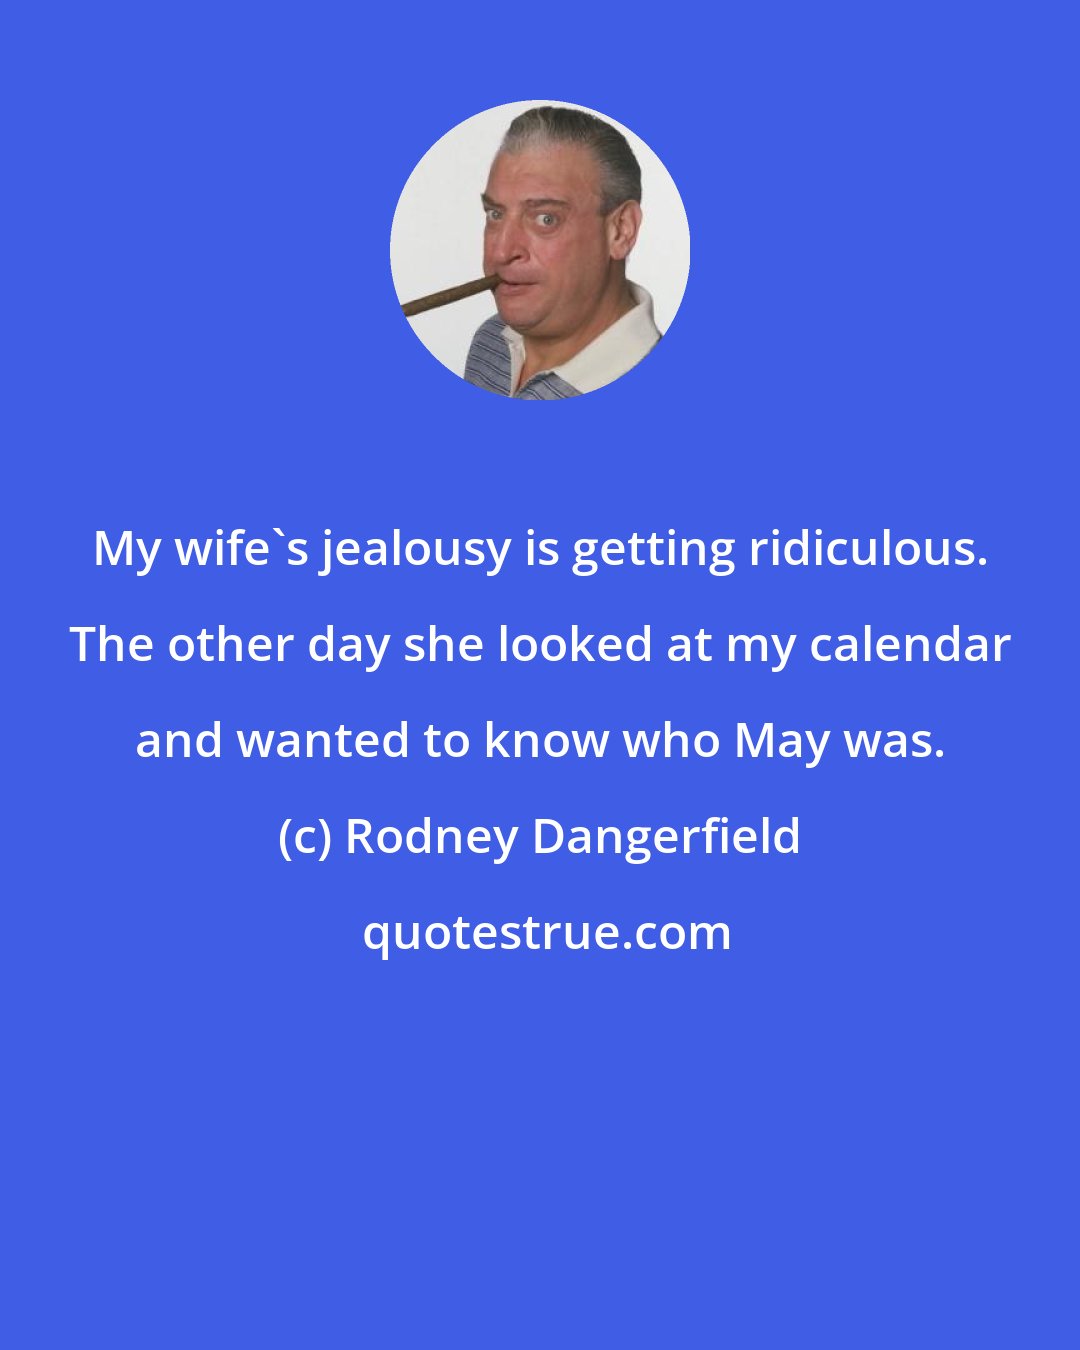 Rodney Dangerfield: My wife's jealousy is getting ridiculous. The other day she looked at my calendar and wanted to know who May was.